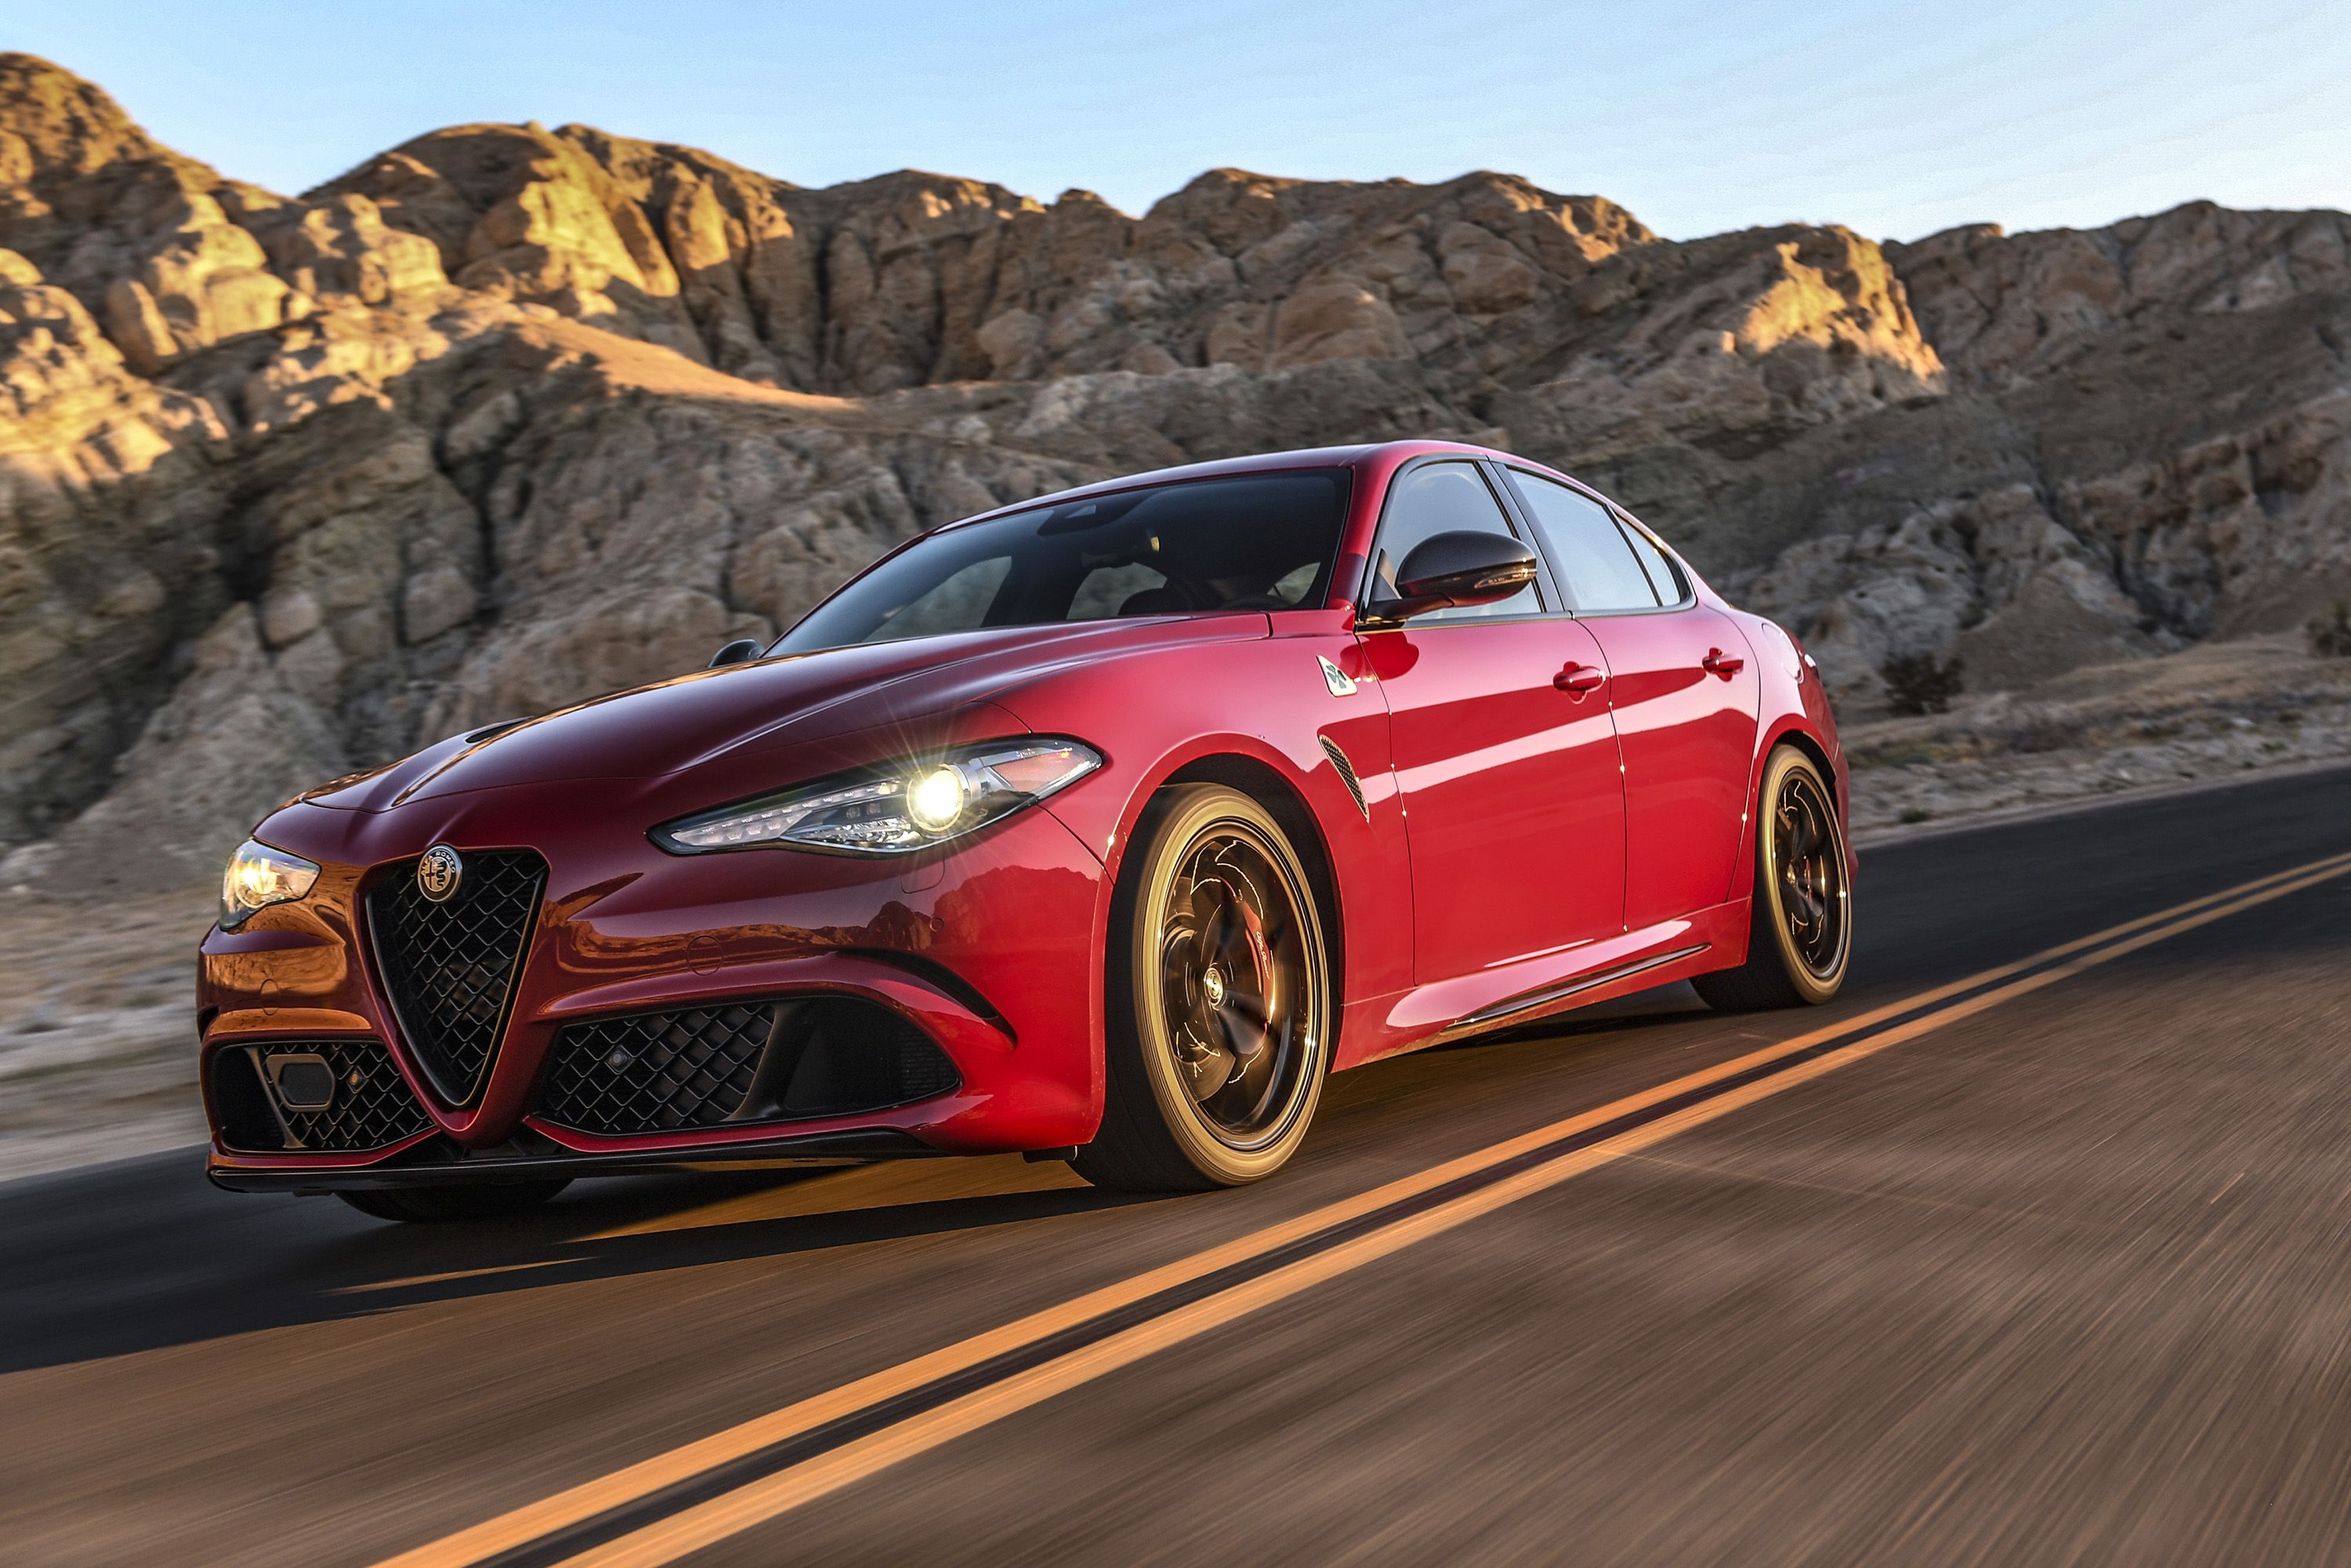 Alfa Romeo done introducing vehicles with gasoline engines